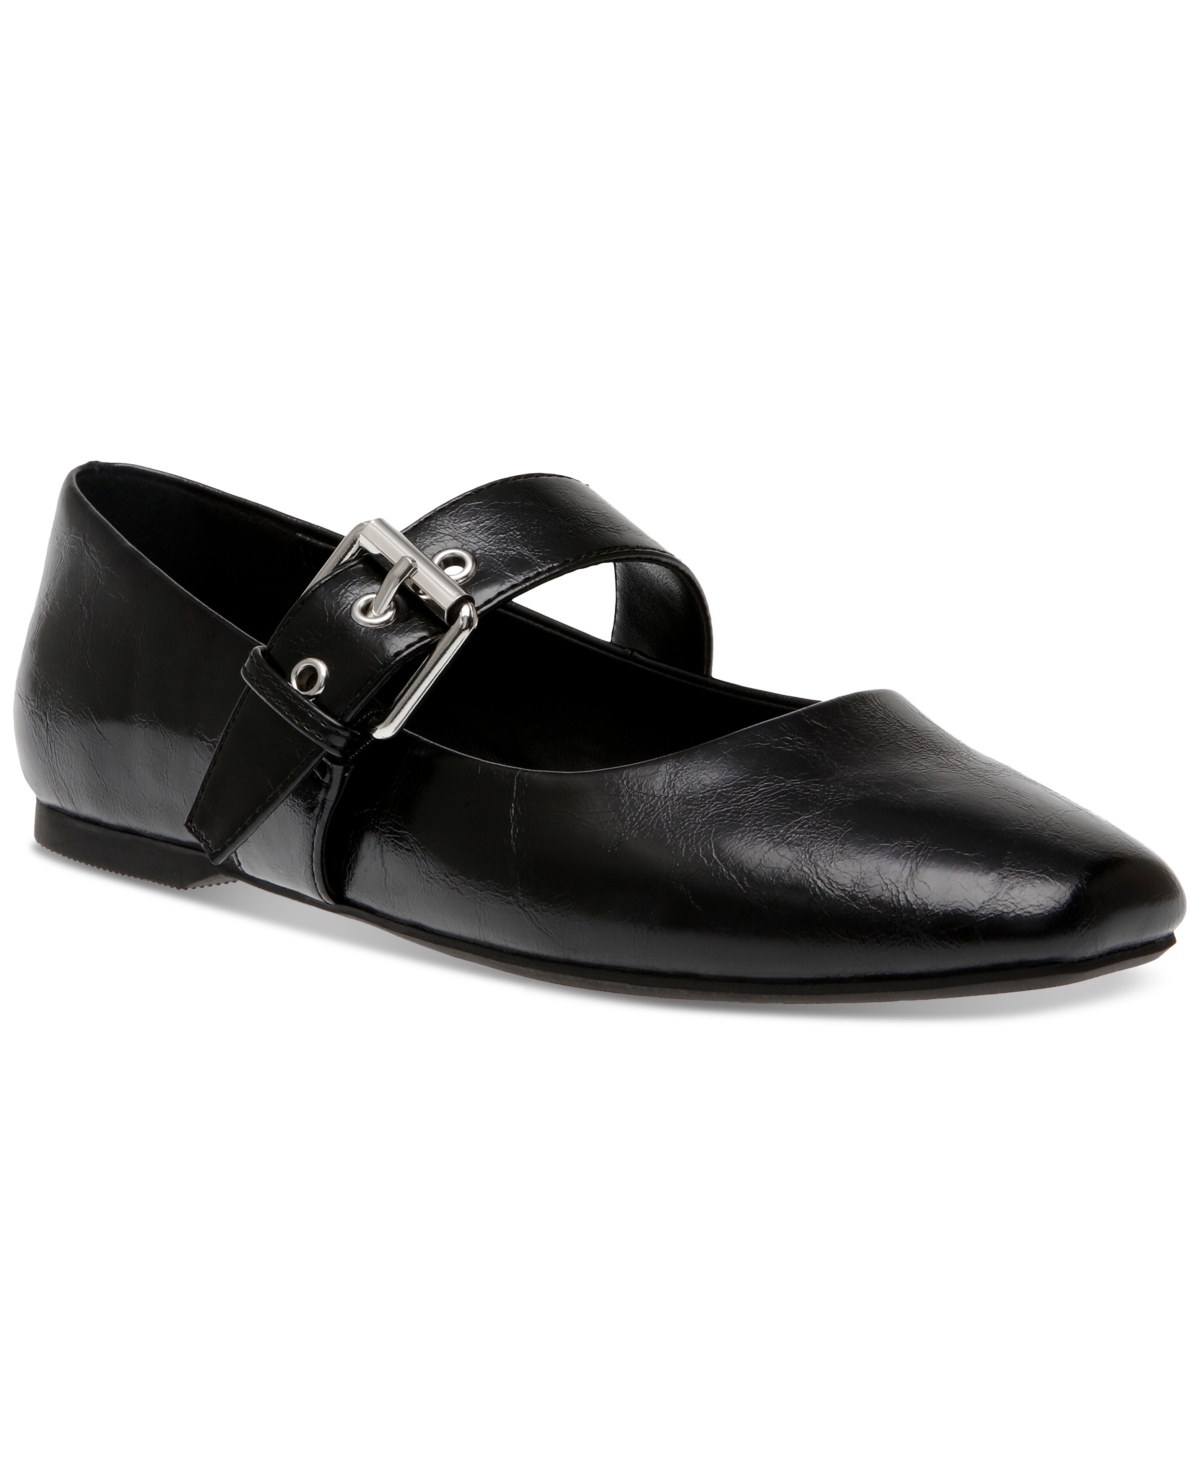 Women's Mellie Buckle Strap Mary Jane Flats - Black Patent